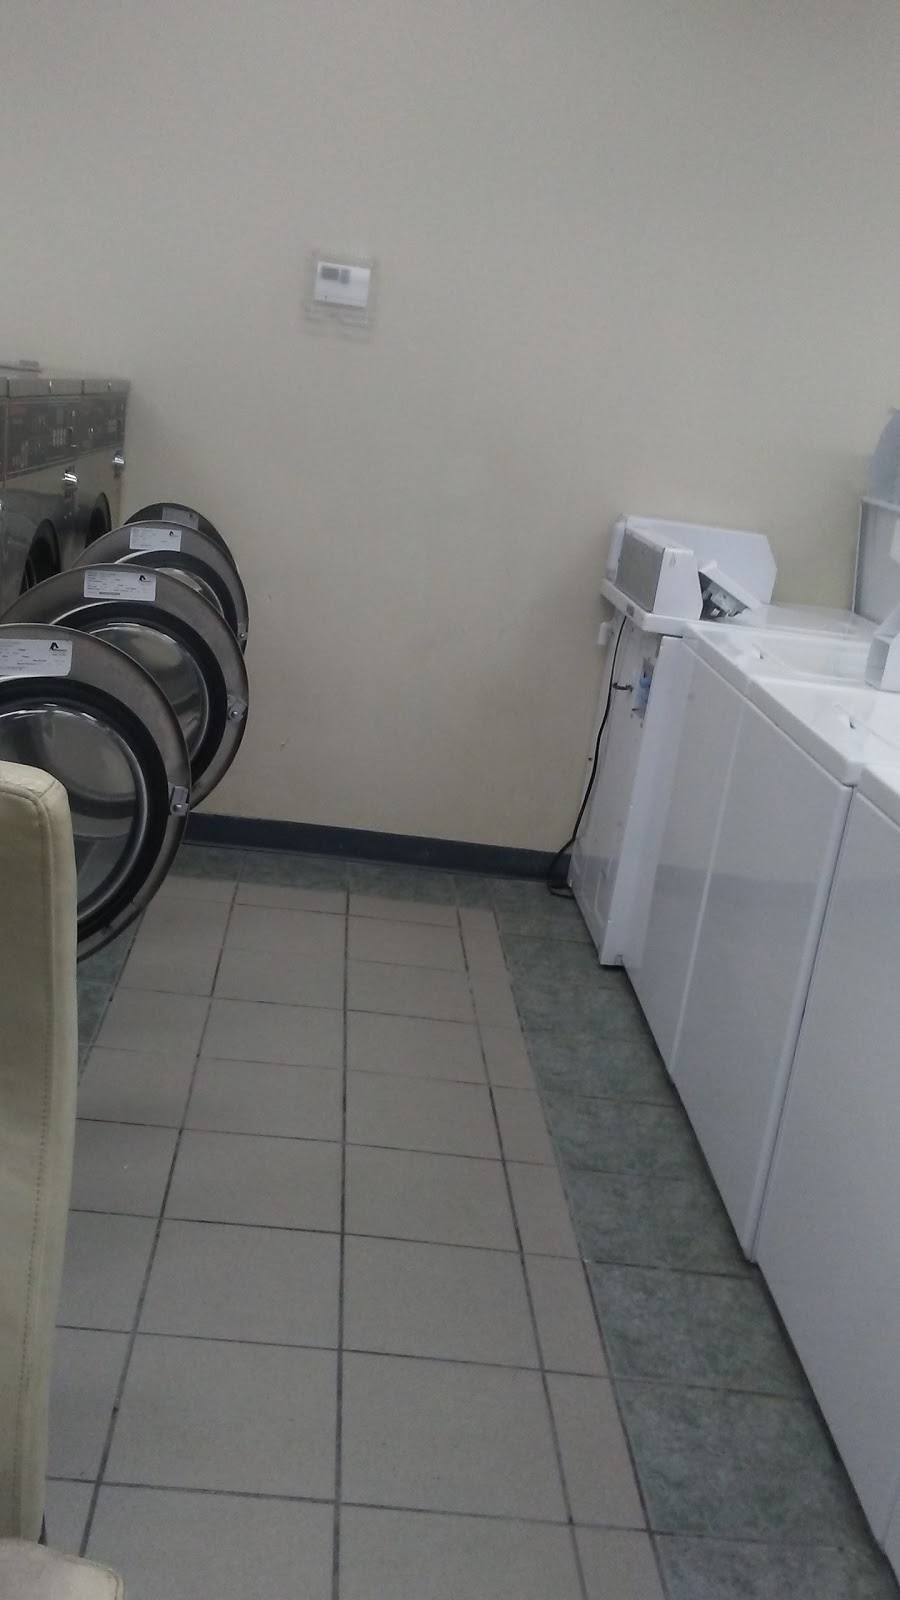 Late Night Coin Laundry | 290 E Corporate Dr d, Lewisville, TX 75067 | Phone: (214) 986-3276